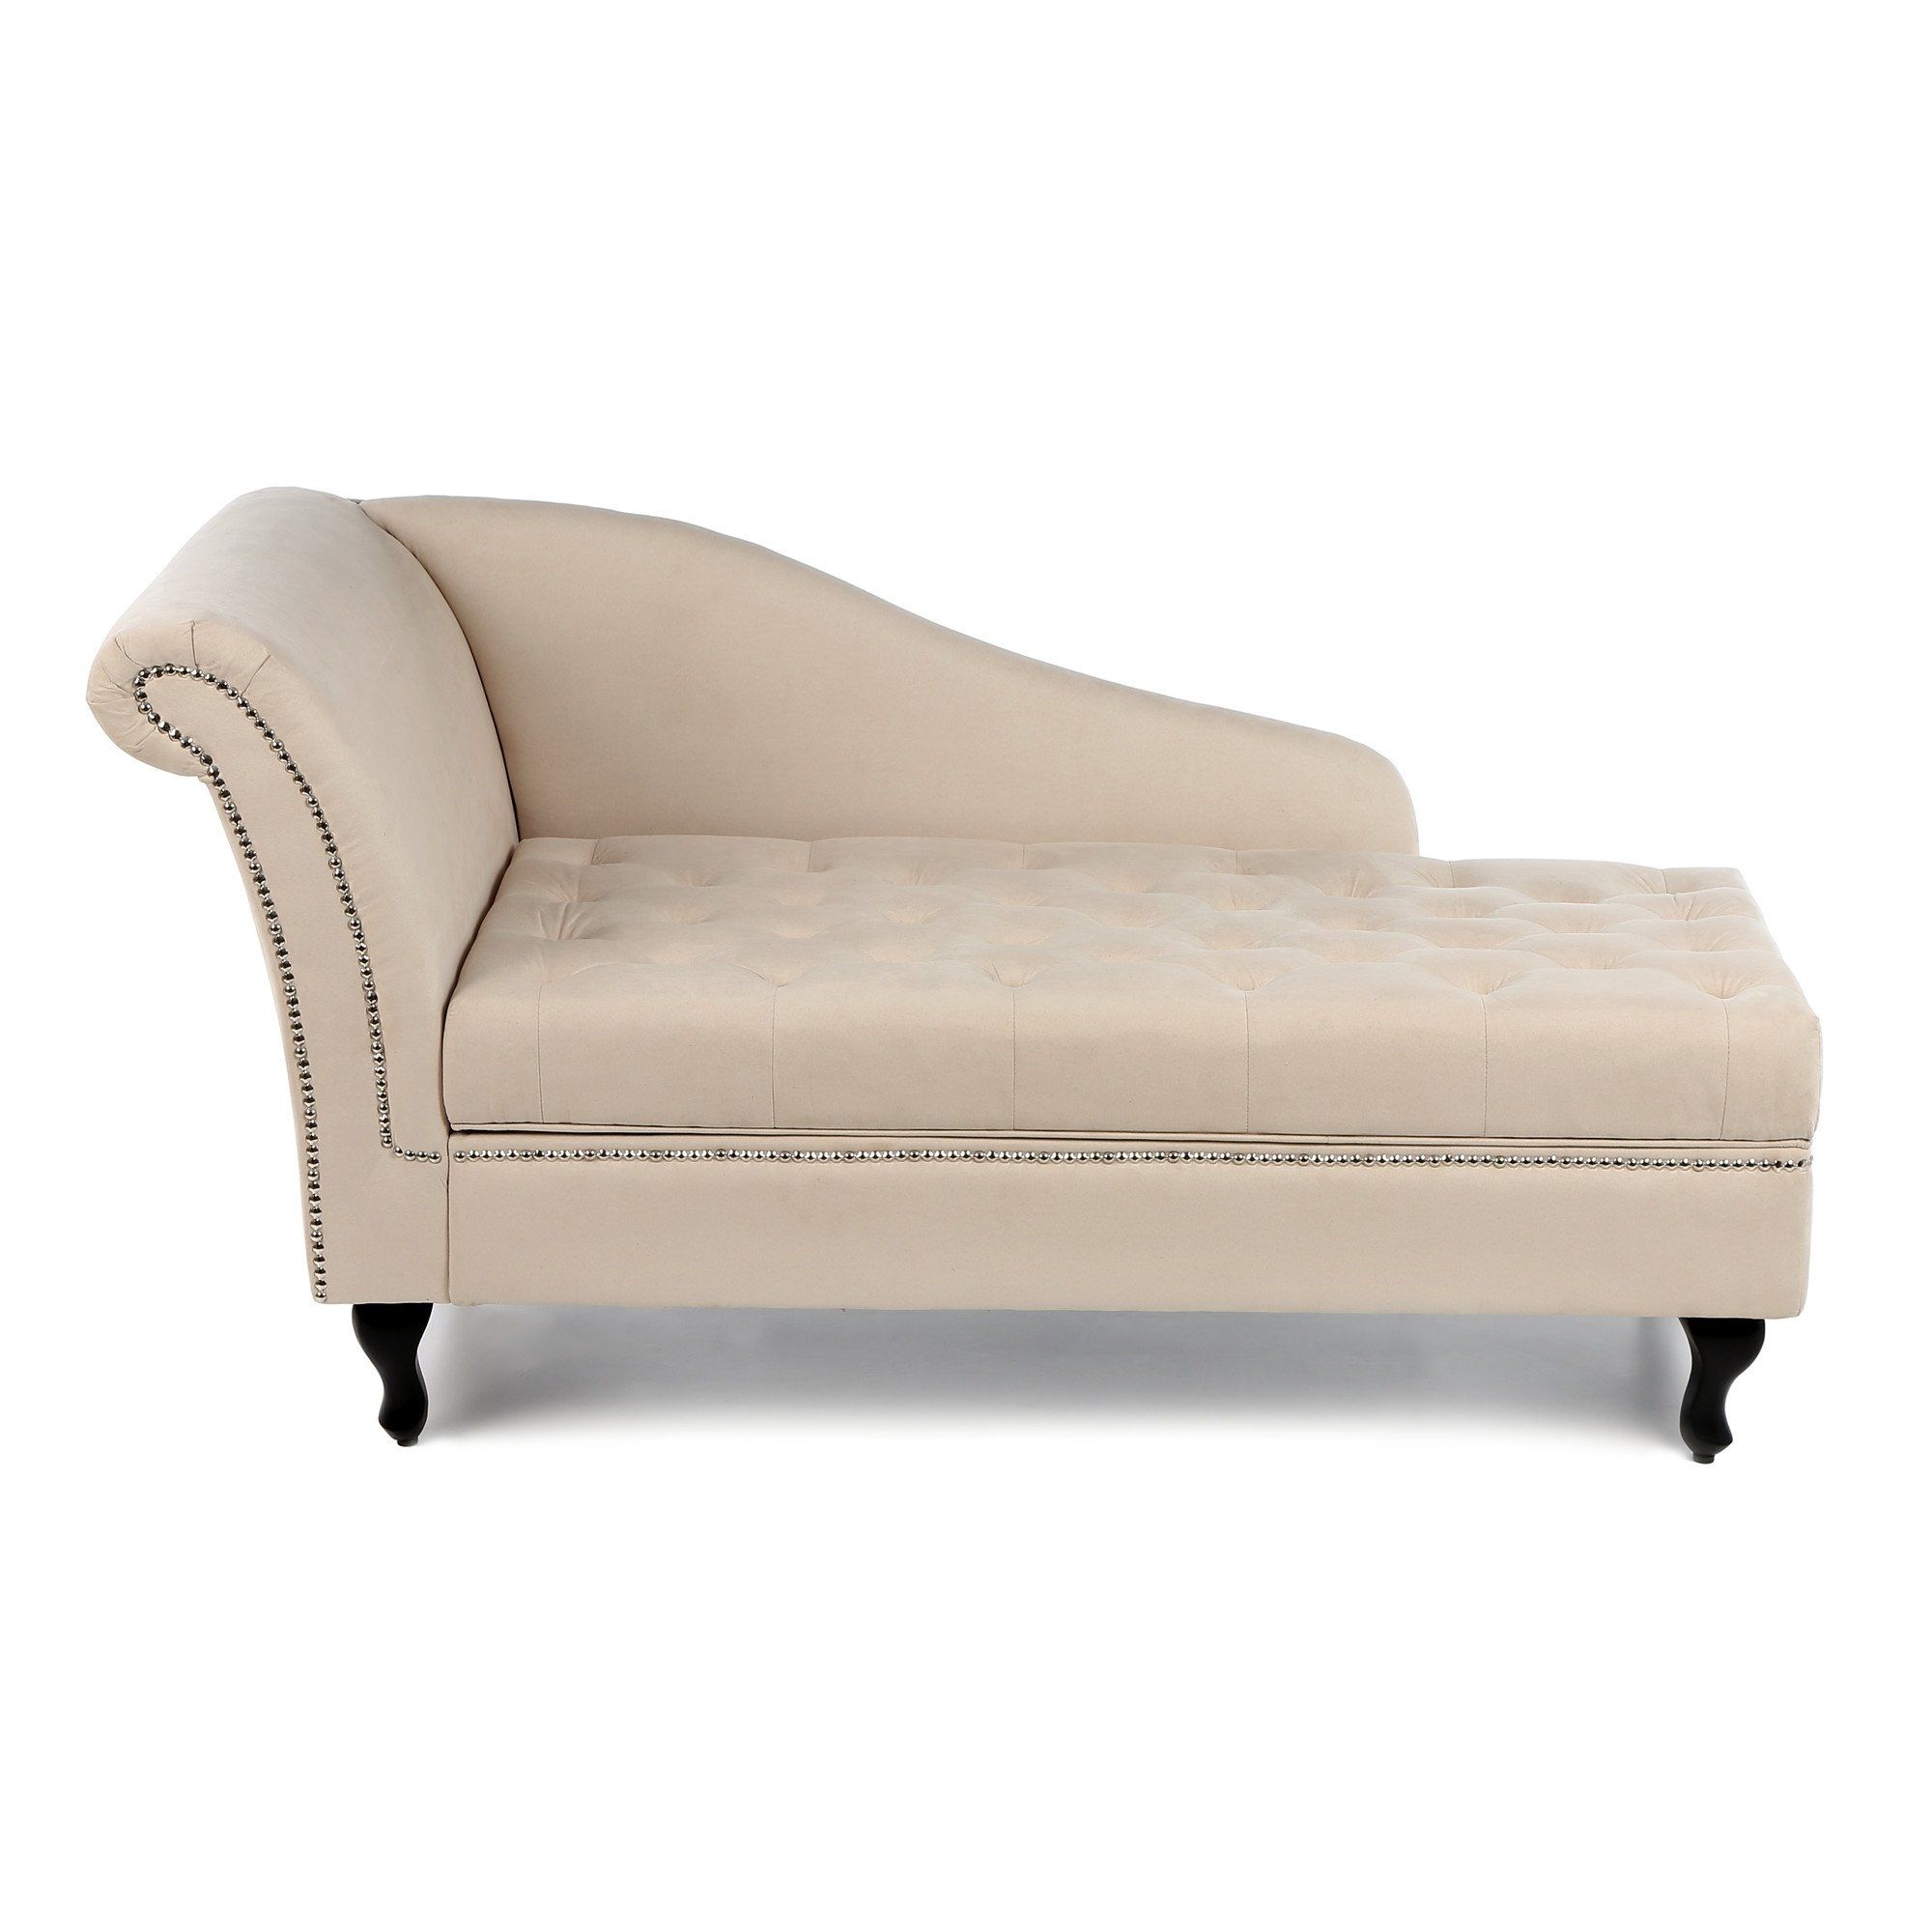 Luxury Chaise Lounge Chairs Intended For Well Liked $300 Amazon – Storage Chaise Lounge Luxurious Tufted Classic (View 14 of 15)